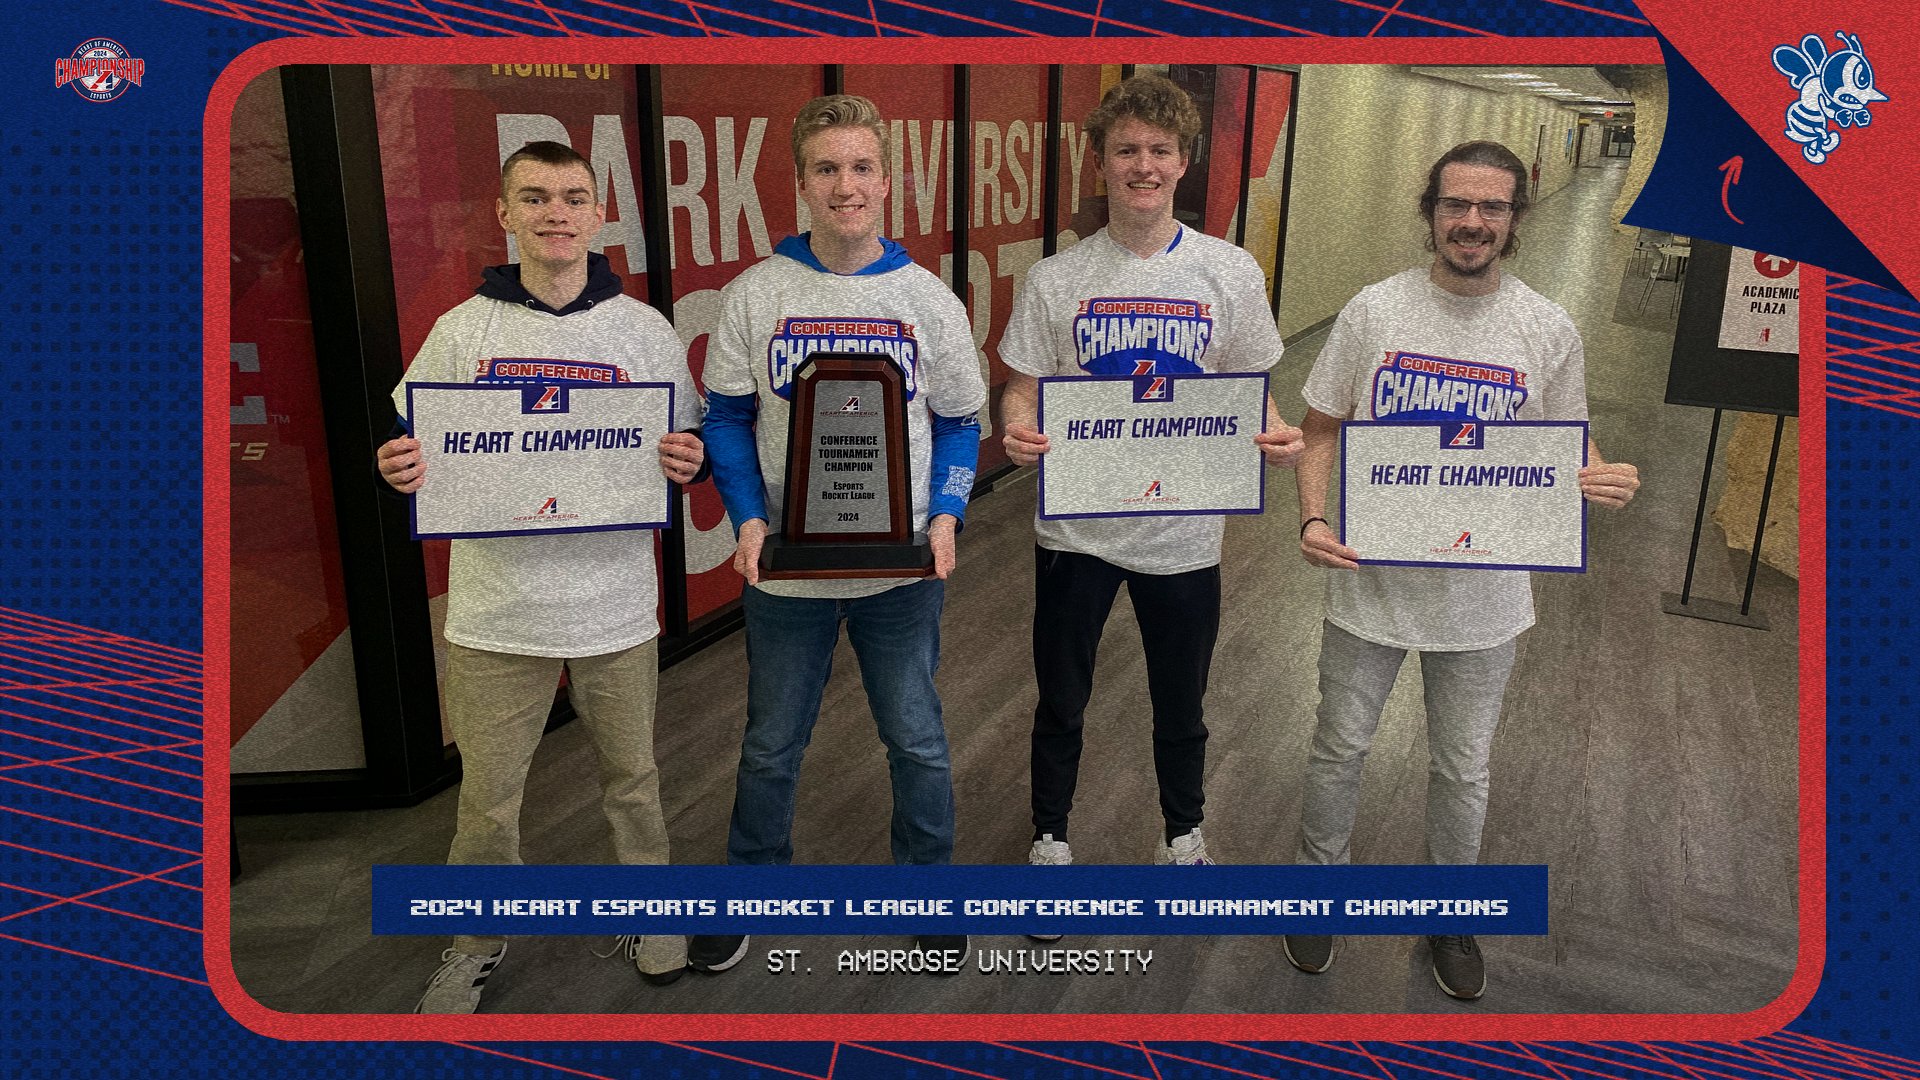 No. 4 St. Ambrose Wins First-Ever Heart Esports Rocket League Conference Tournament Championship